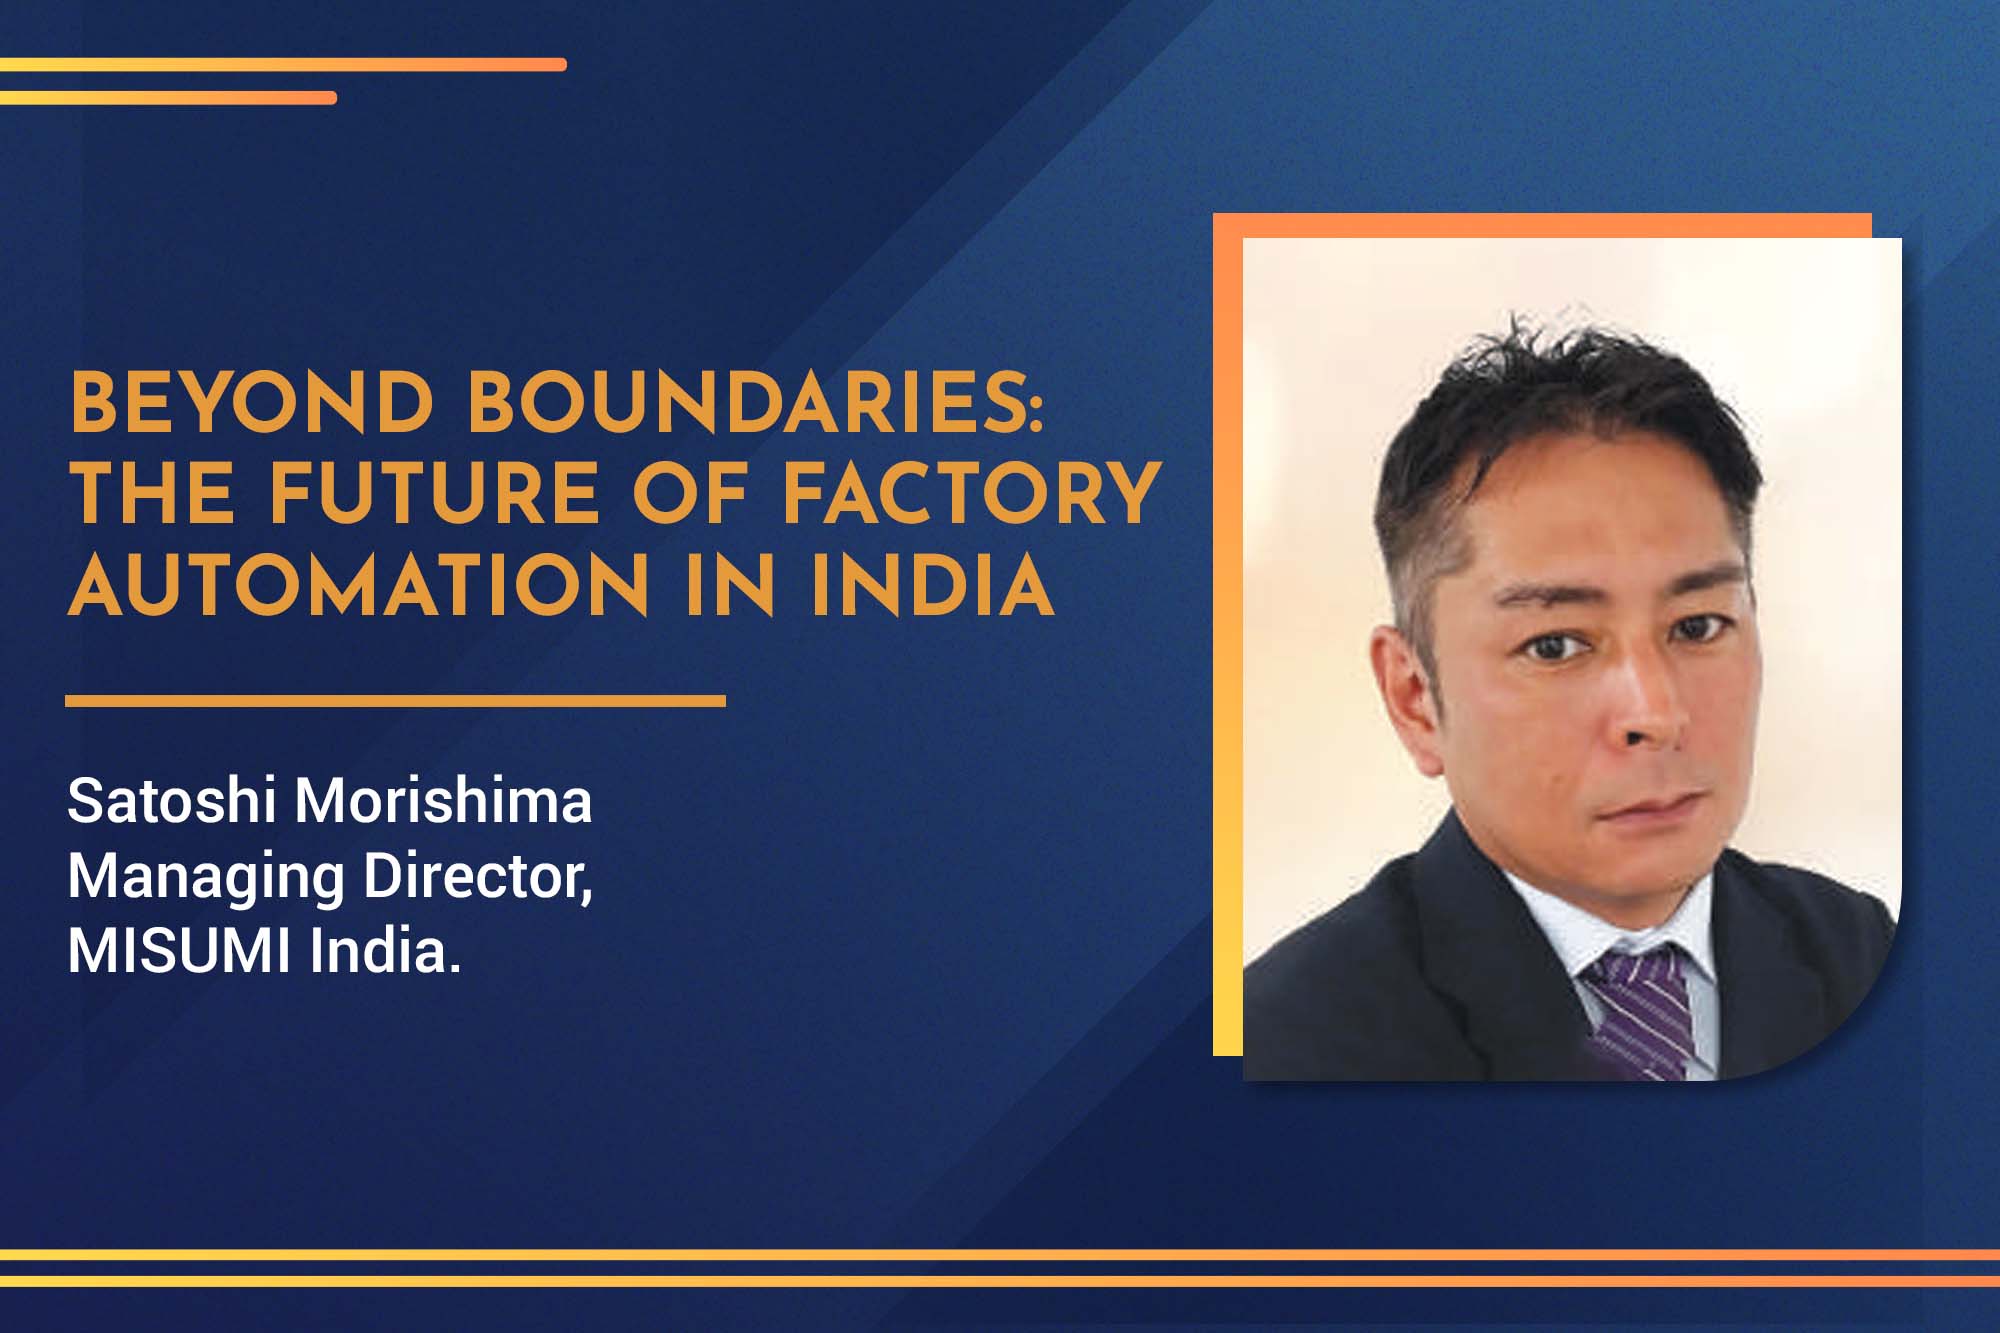 Beyond boundaries: The future of Factory Automation in India